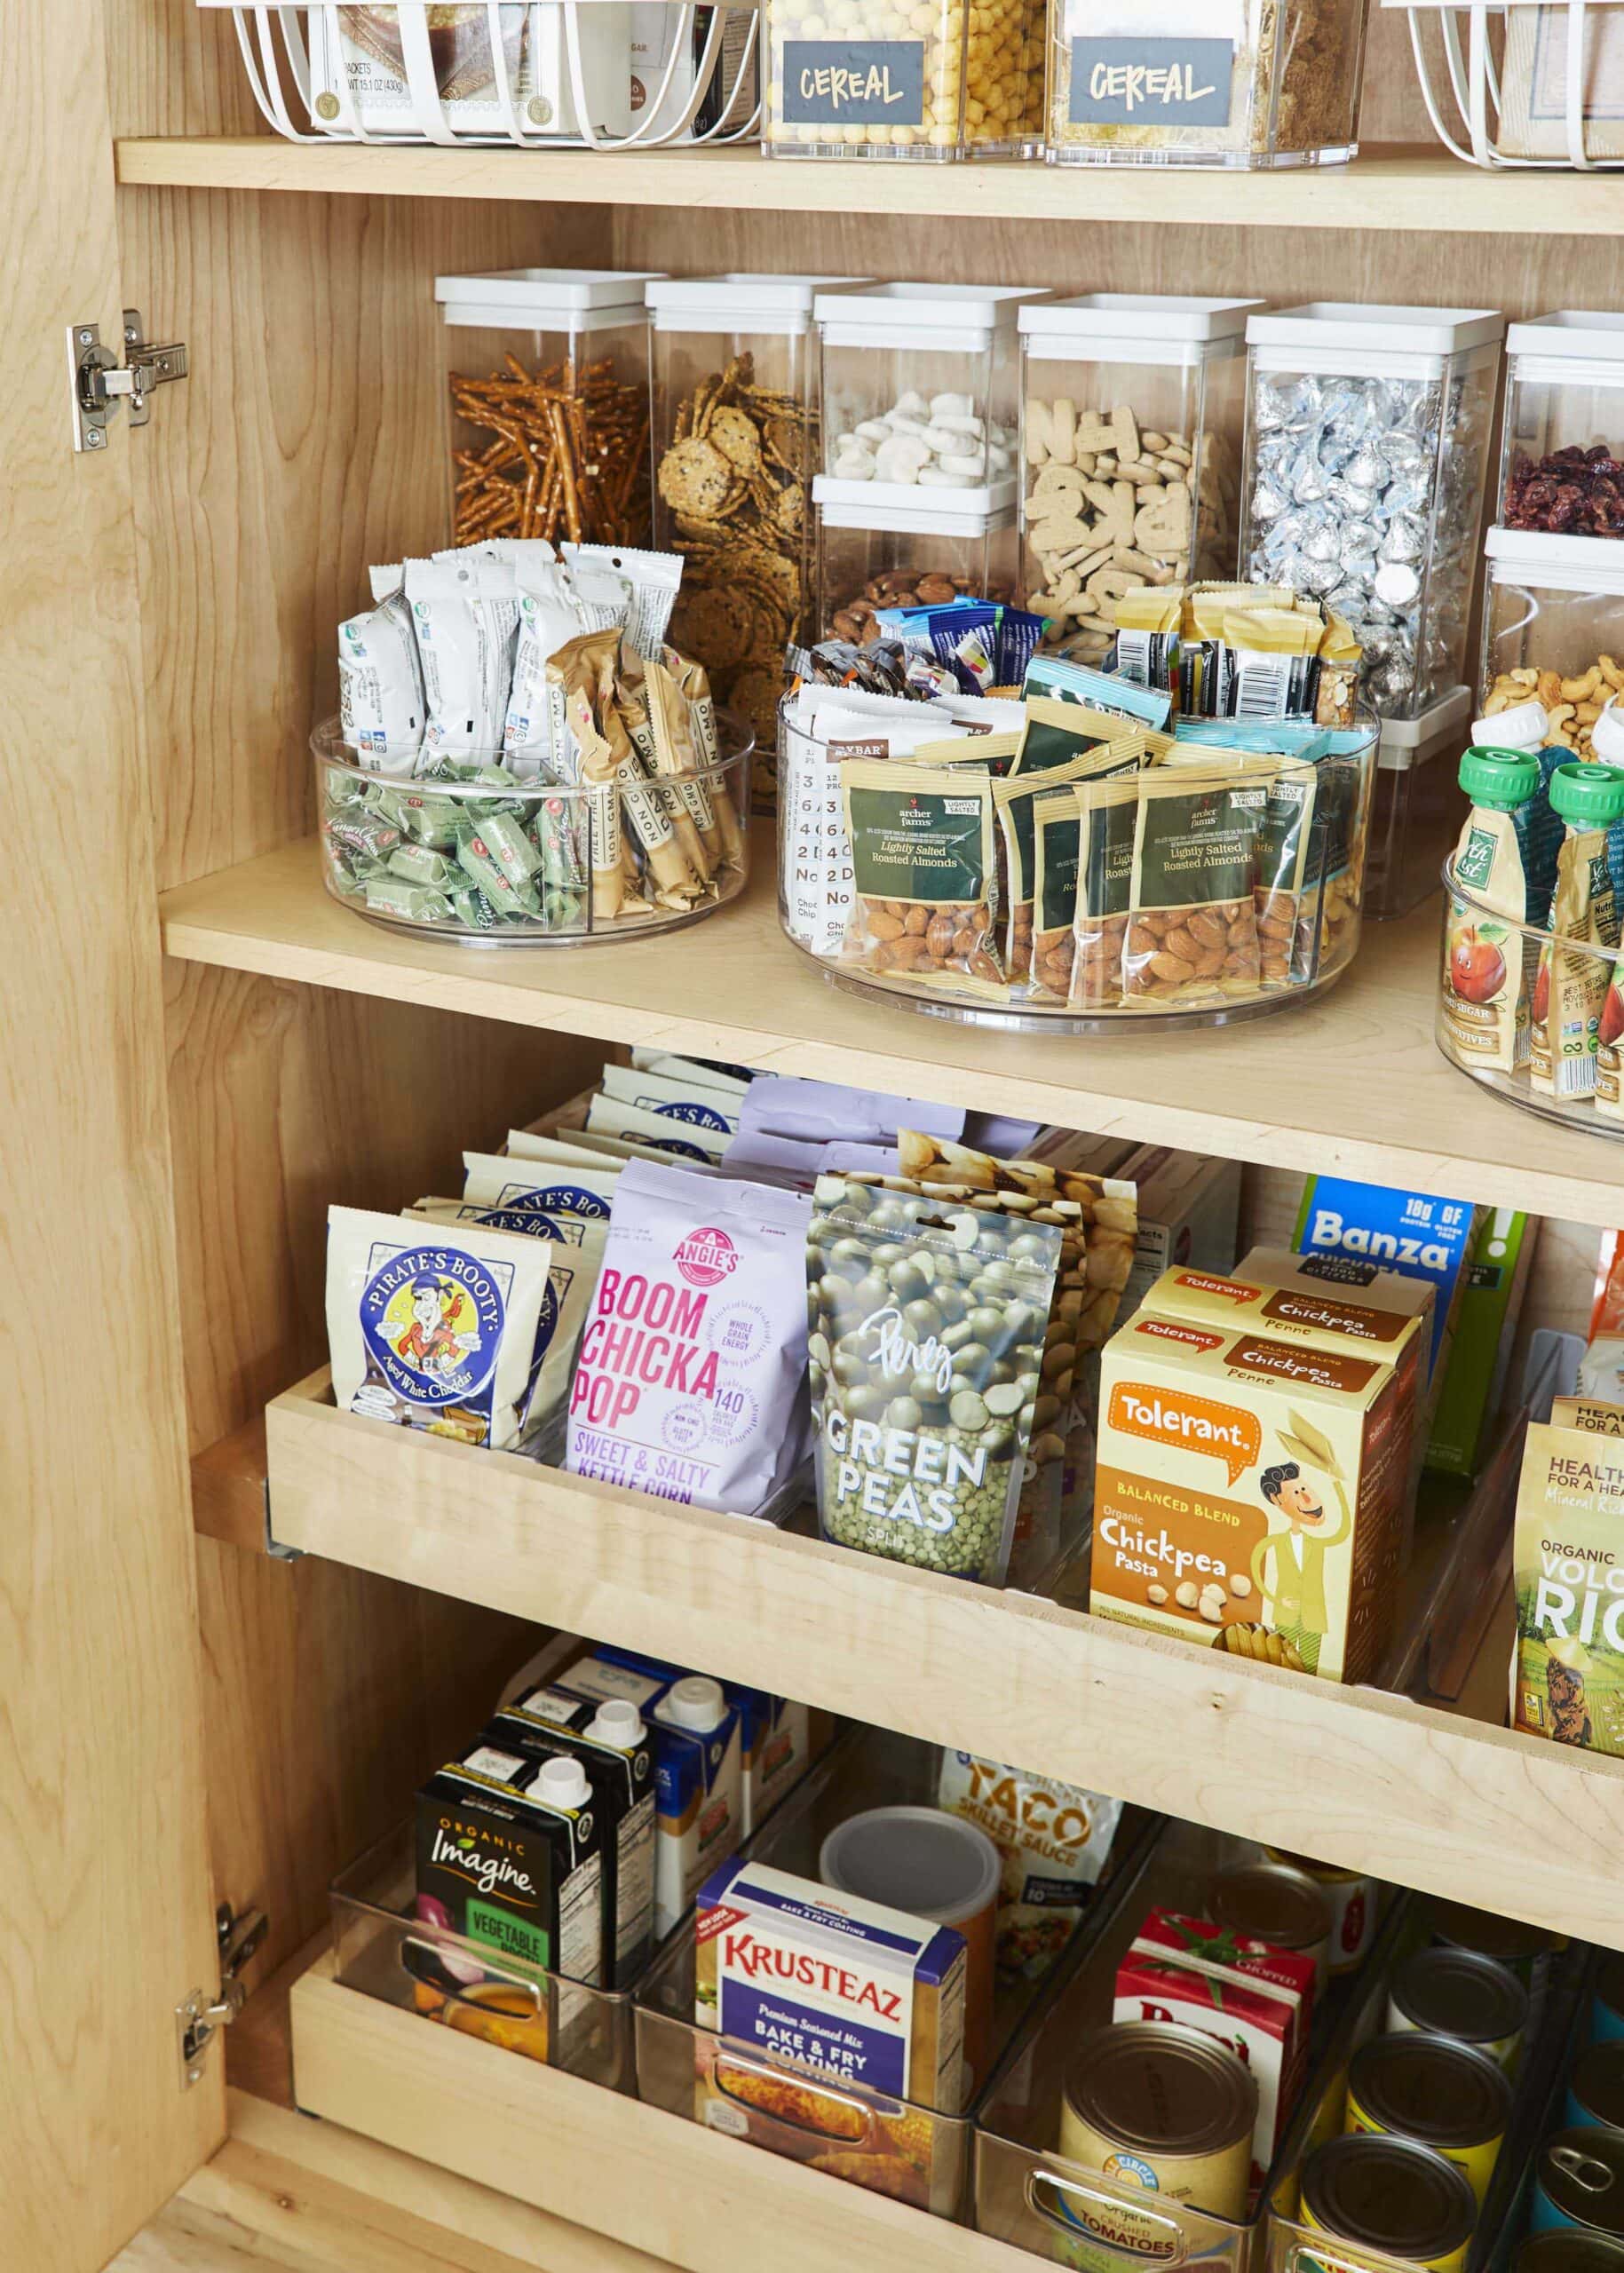 Pantry shelves using lazy susans for organization and to corral items.